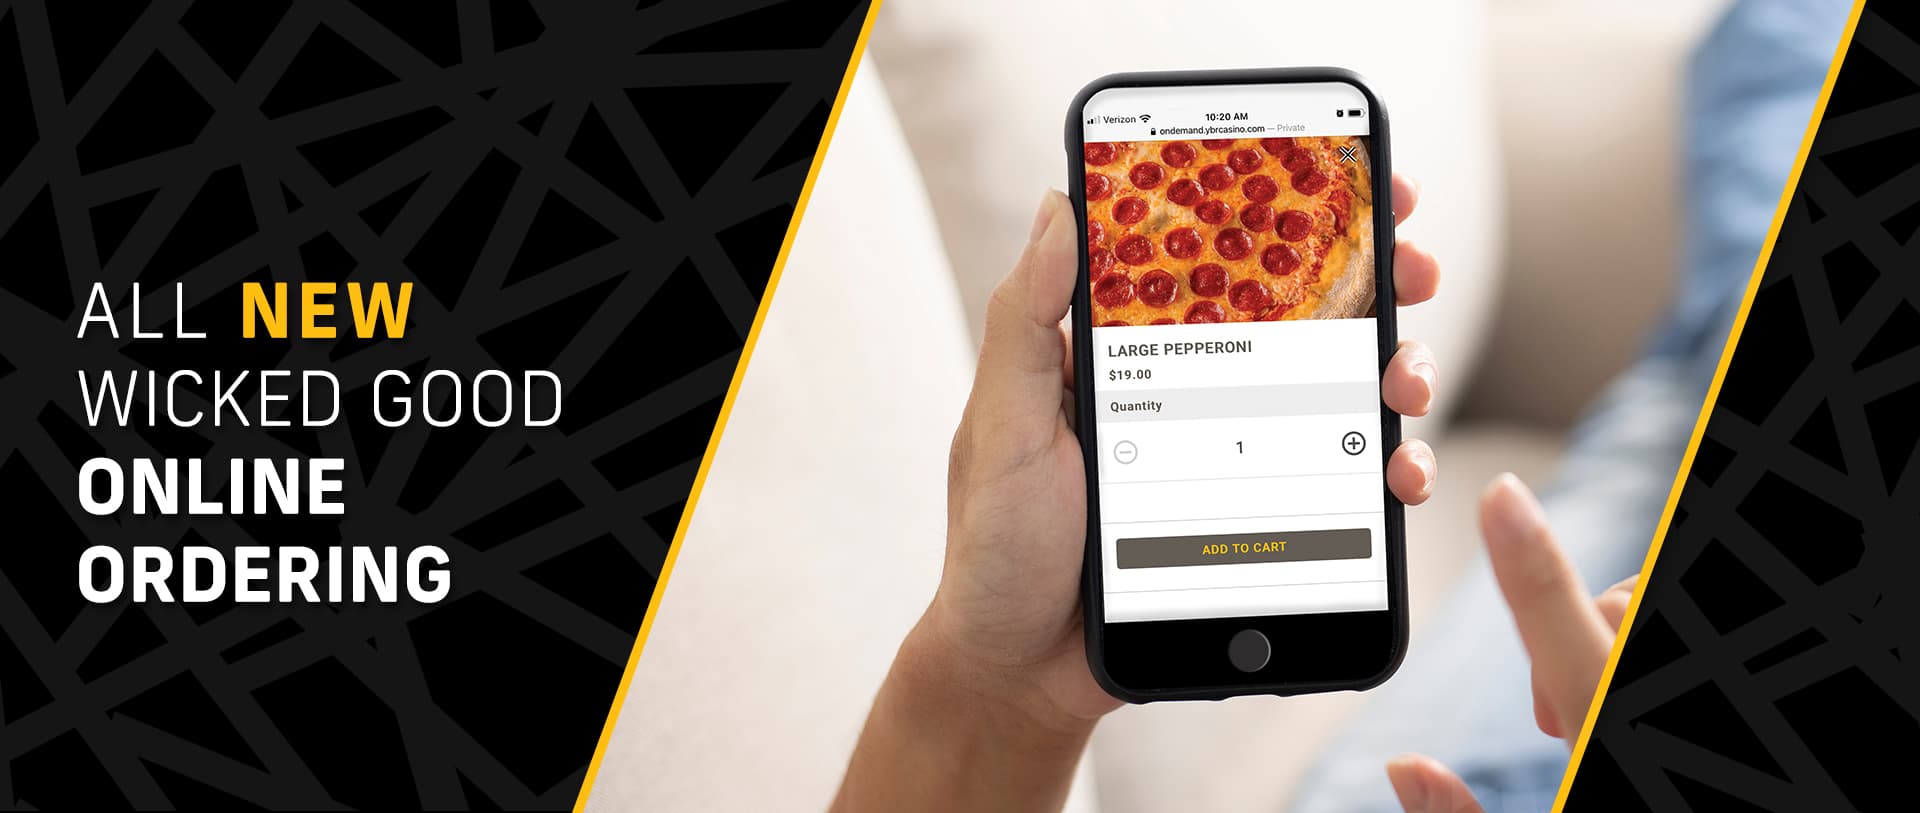 all new wicked good online ordering - ordering a pizza on on demand app from ybr casino and sports book